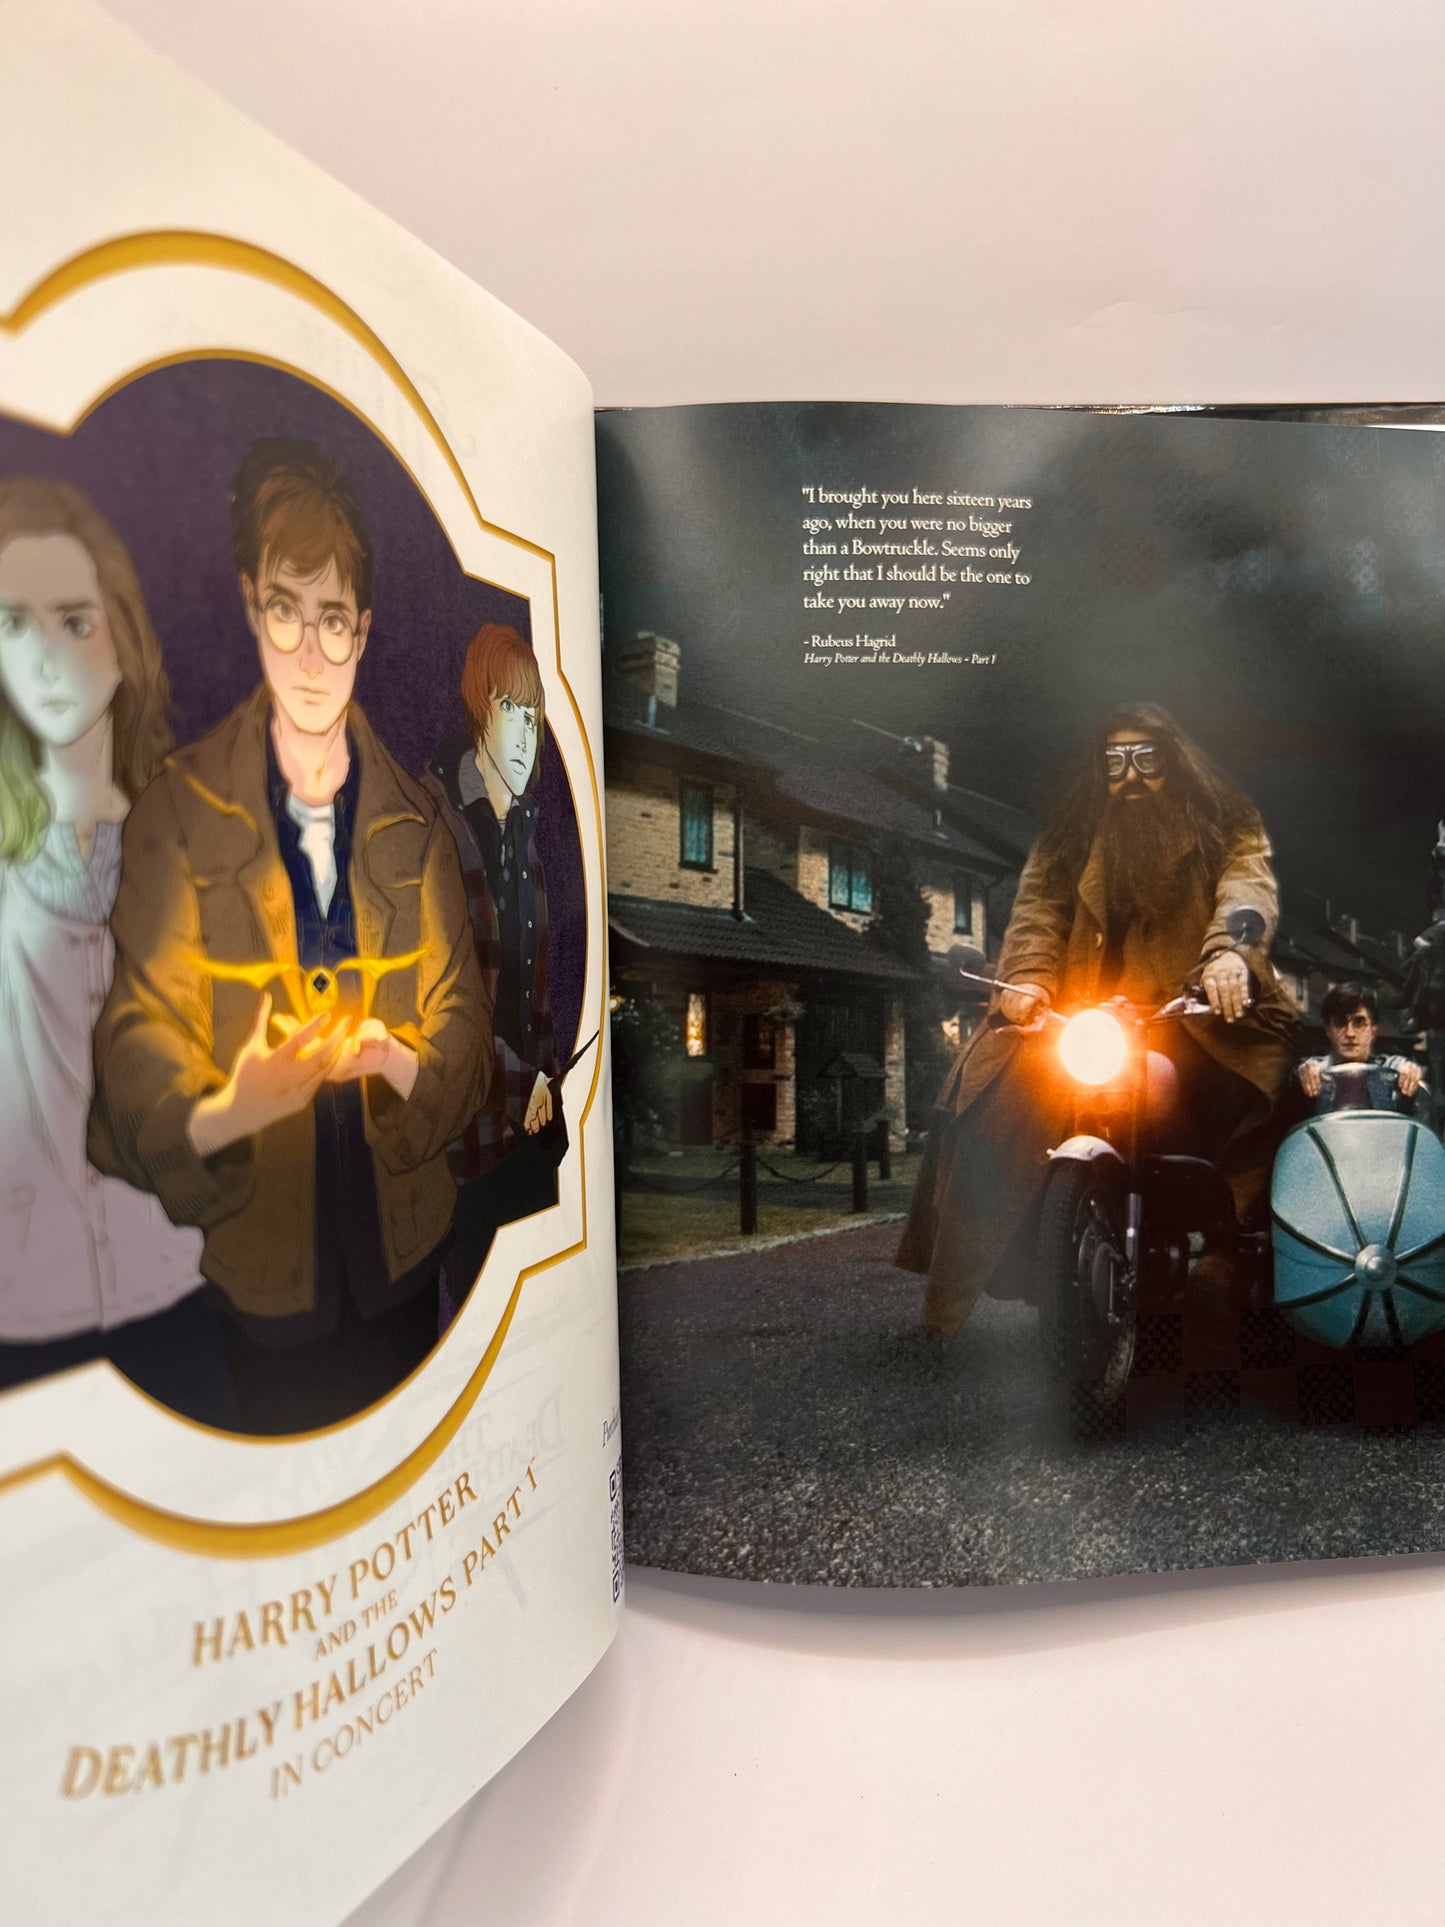 Harry Potter and the Deathly Hallows™ - Part 1 in Concert Hardback Program Book